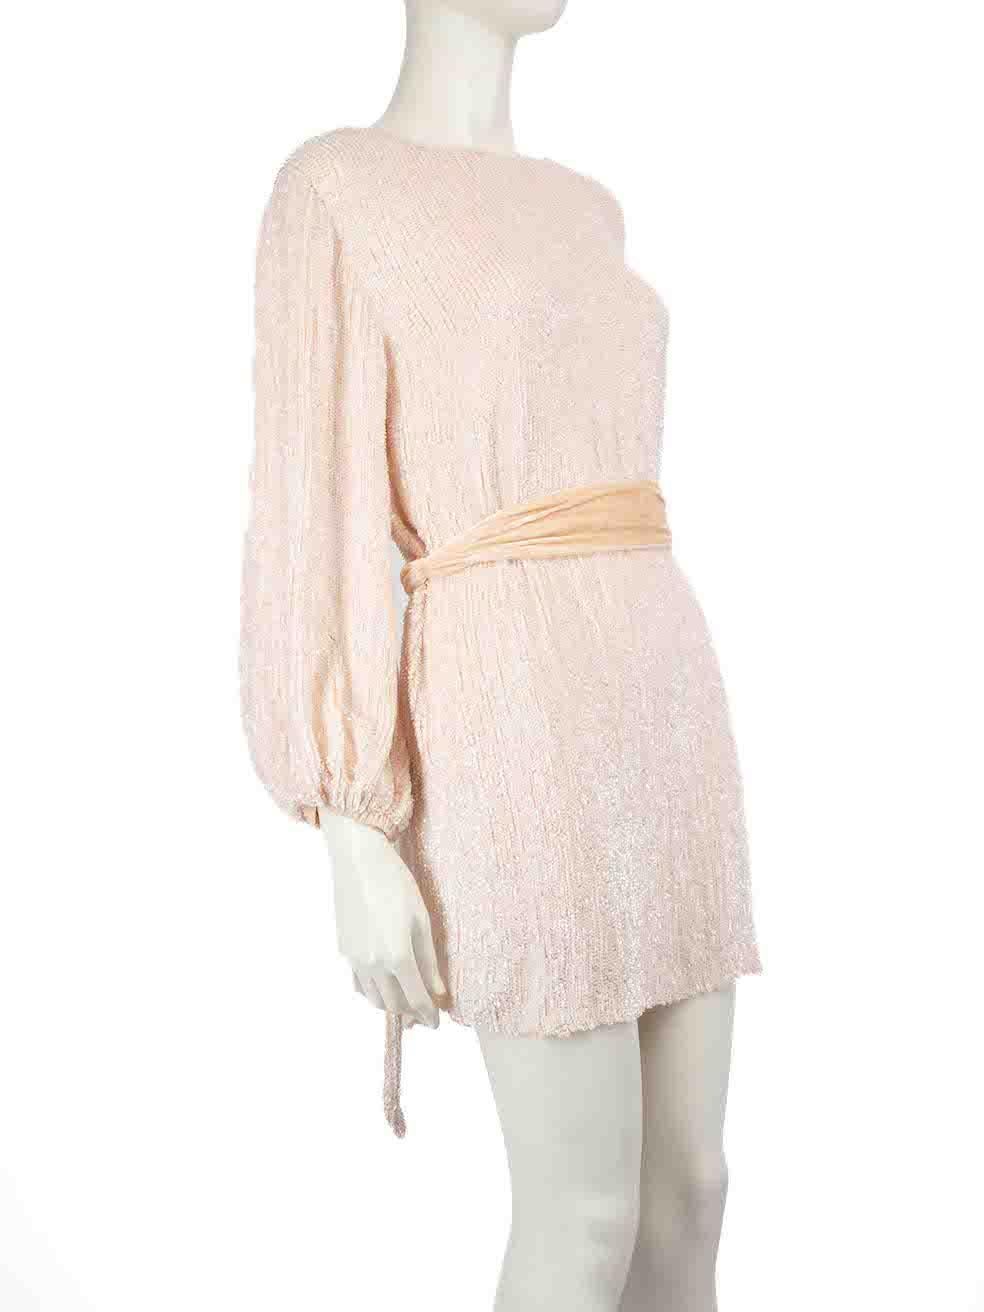 CONDITION is Never worn, with tags. No visible wear to dress is evident. However, due to poor storage, there is a loose thread on the back bottom left sleeve on this new Retrofete designer resale item.
 
 
 
 Details
 
 
 Pink
 
 Viscose
 
 Dress
 
